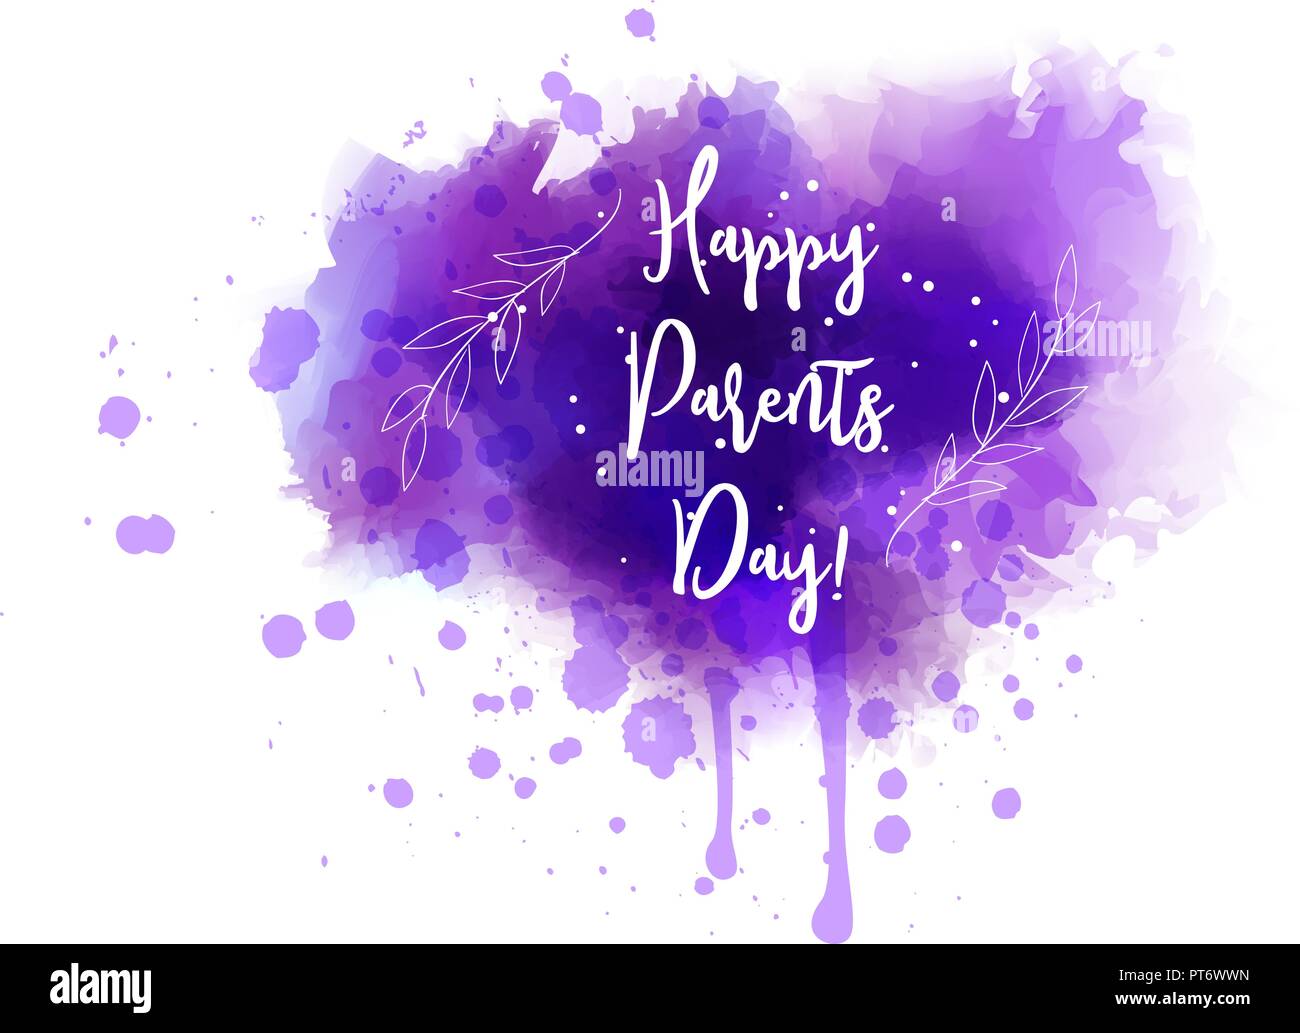 Happy Parents Day! Abstract grunge watercolor background. Holiday background. Purple colored with abstract leaves floral decorations. Stock Vector